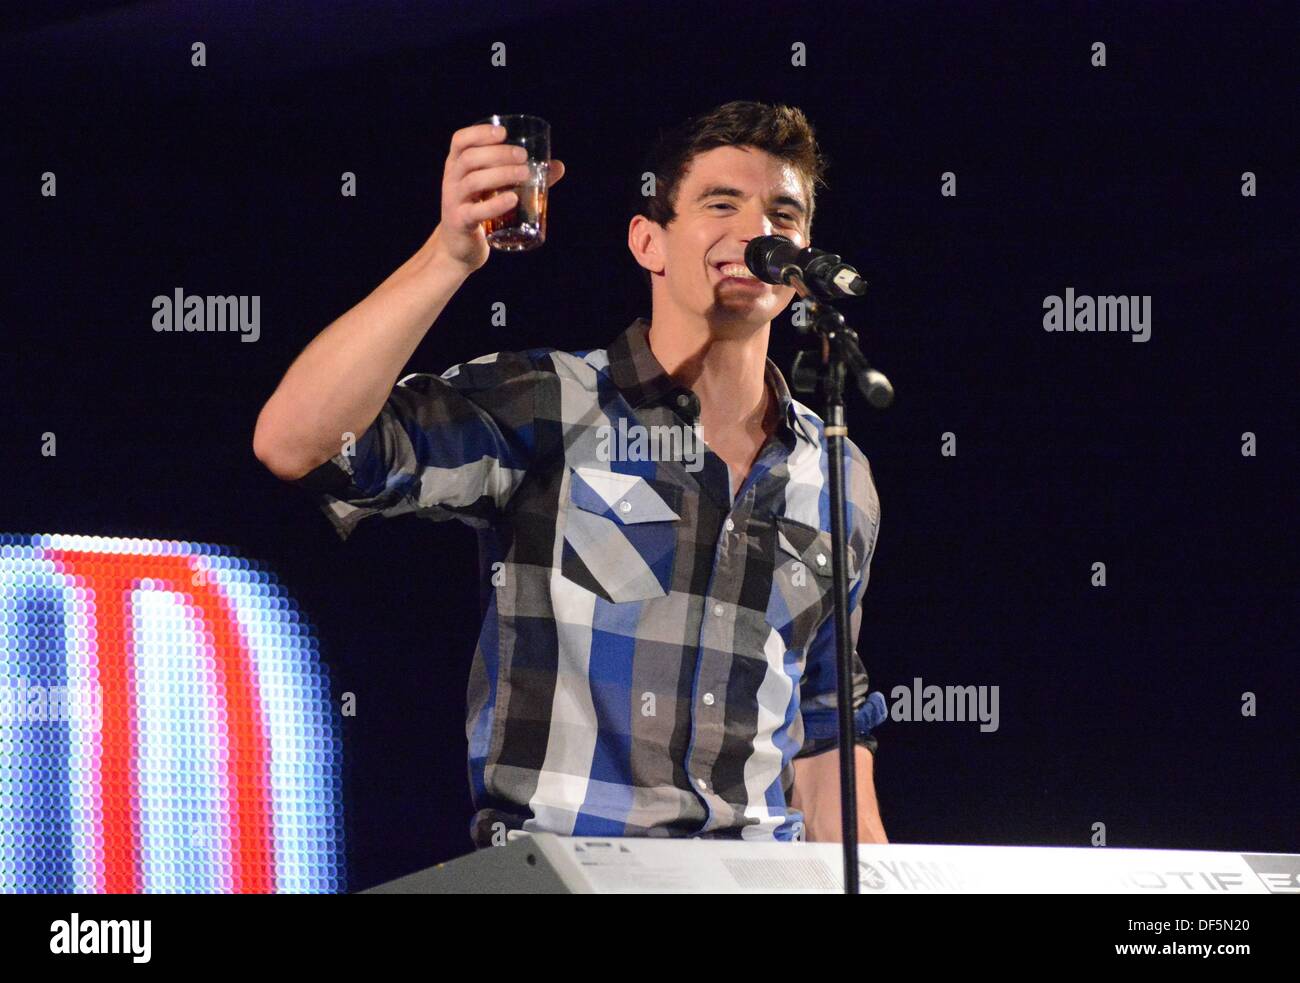 New York, NY. 27th Sep, 2013. Steve Grand in attendance for Gay Country Music Star Steve Grand at XL, XL Nightclub, New York, NY September 27, 2013. © Derek Storm/Everett Collection/Alamy Live News Stock Photo